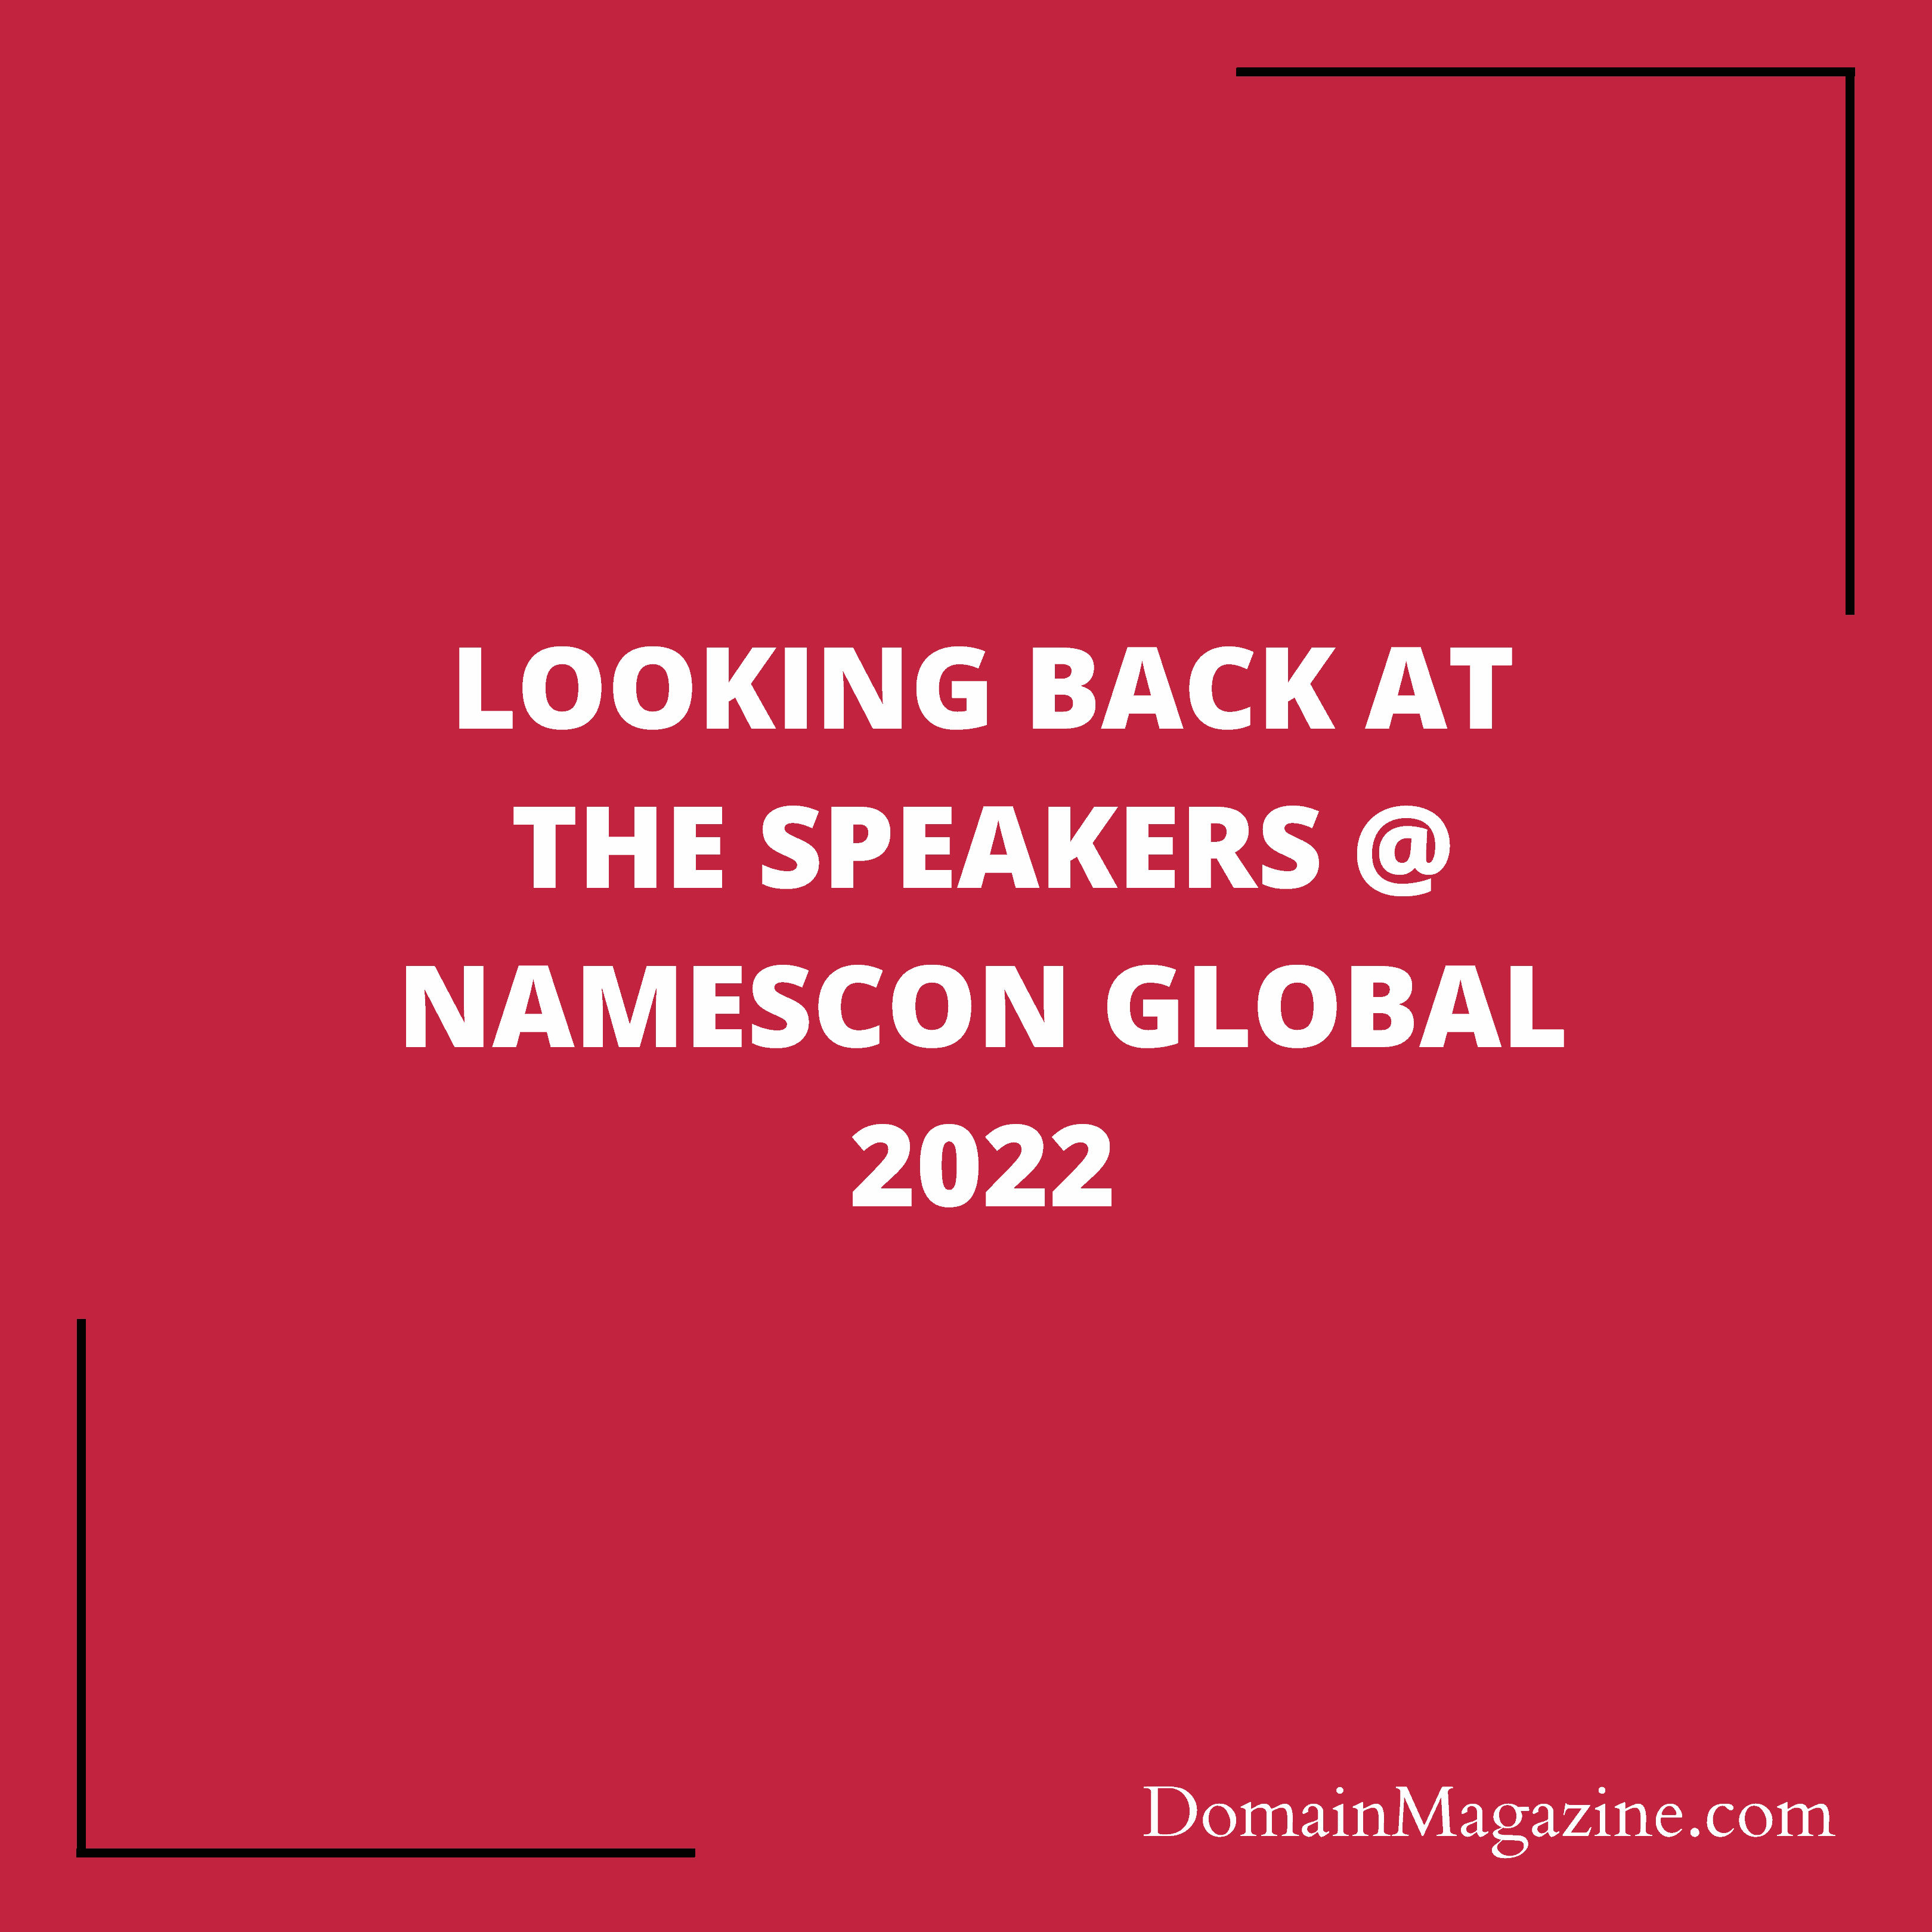 Looking back at the Speakers @ NamesCon Global 2022